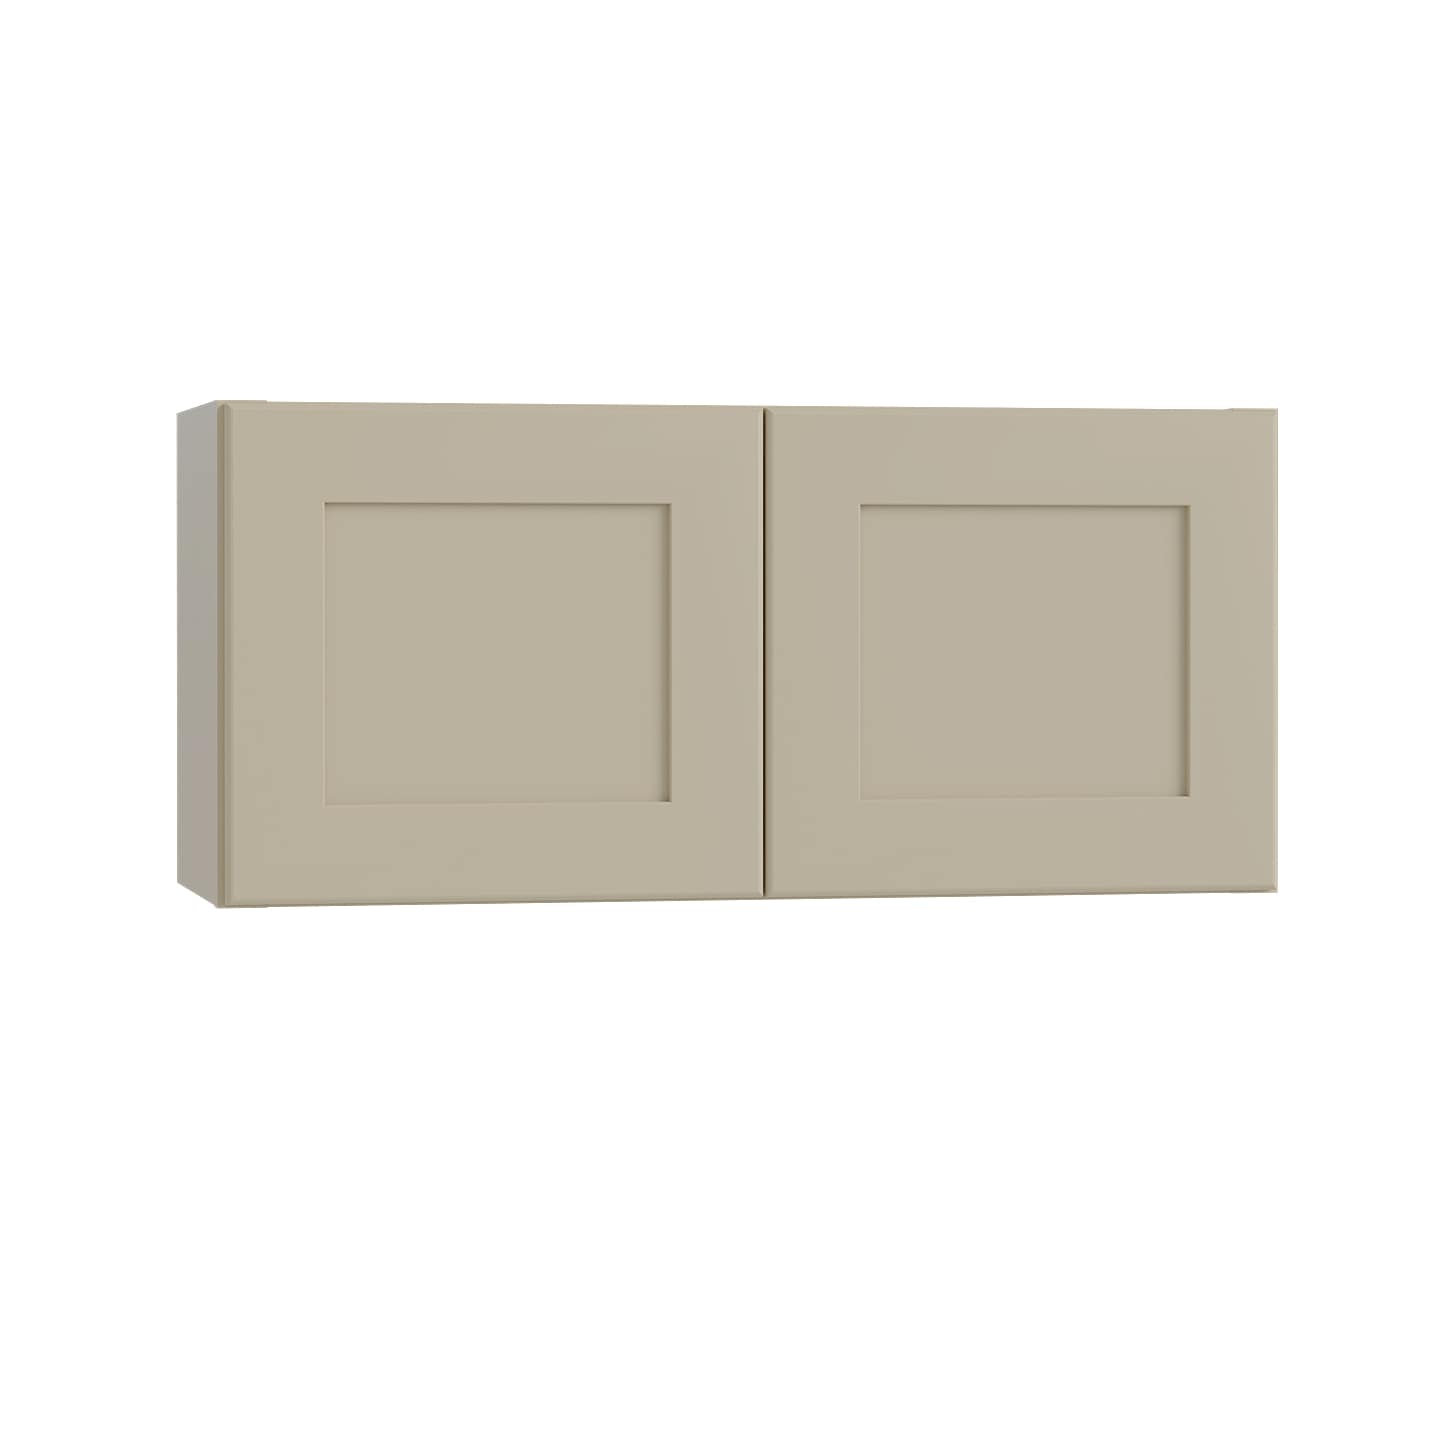 Luxxe Cabinetry 36-in W x 12-in H x 12-in D Norfolk Blended Cream Painted Door Wall Fully Assembled Semi-custom Cabinet in Off-White | W3612-NBC